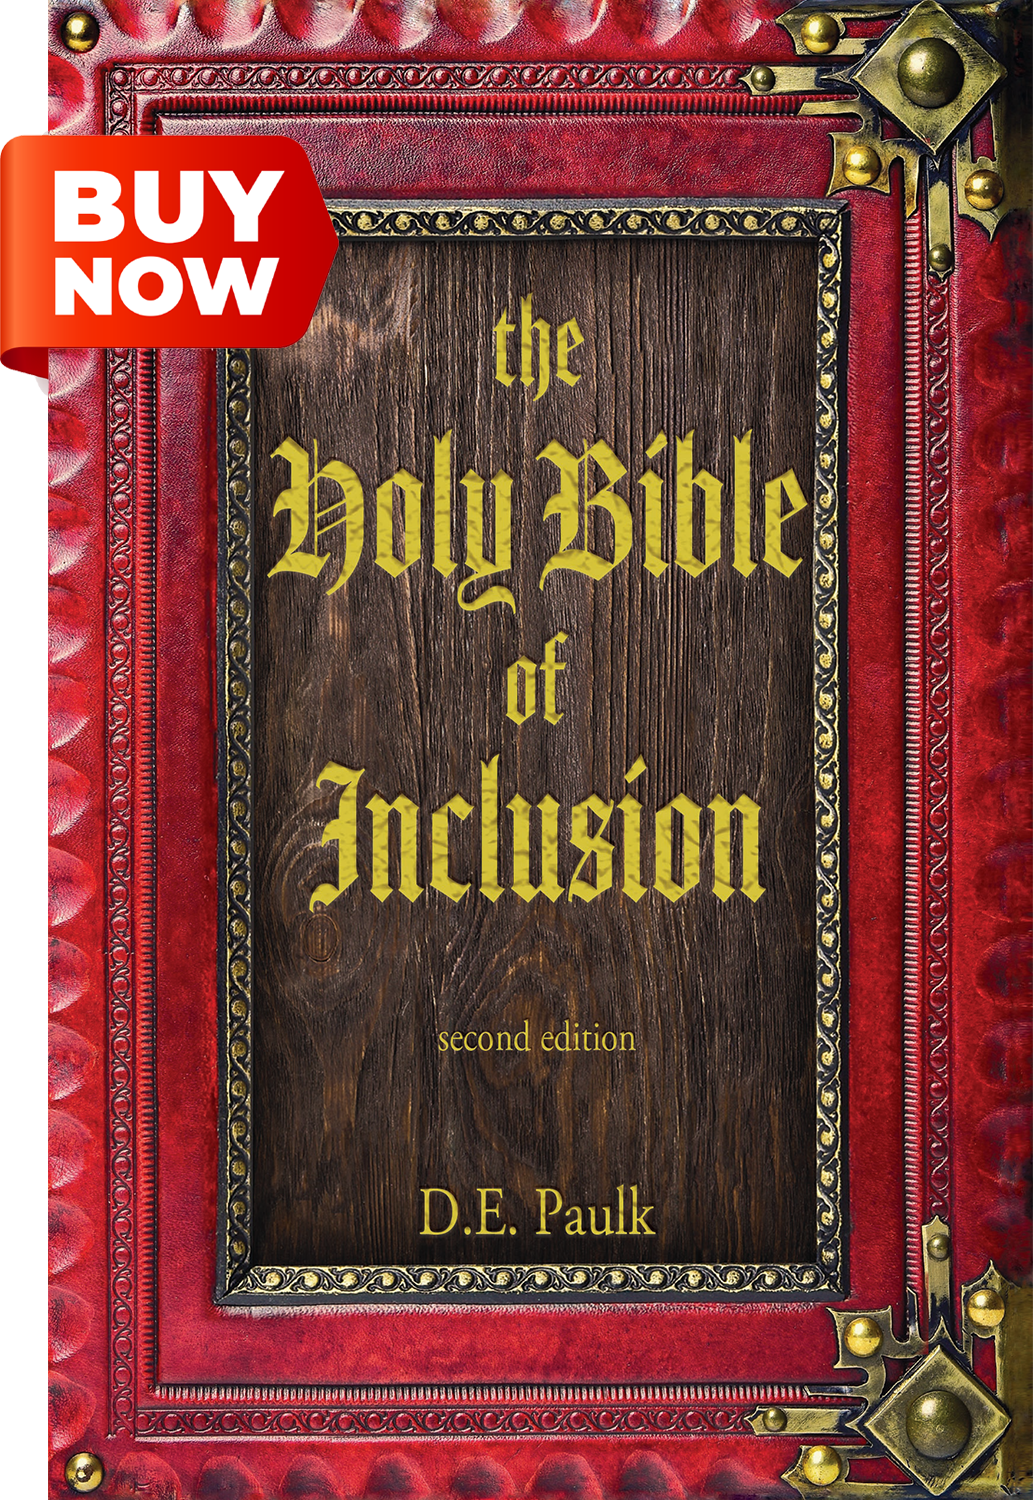 The Holy Bible of Inclusion